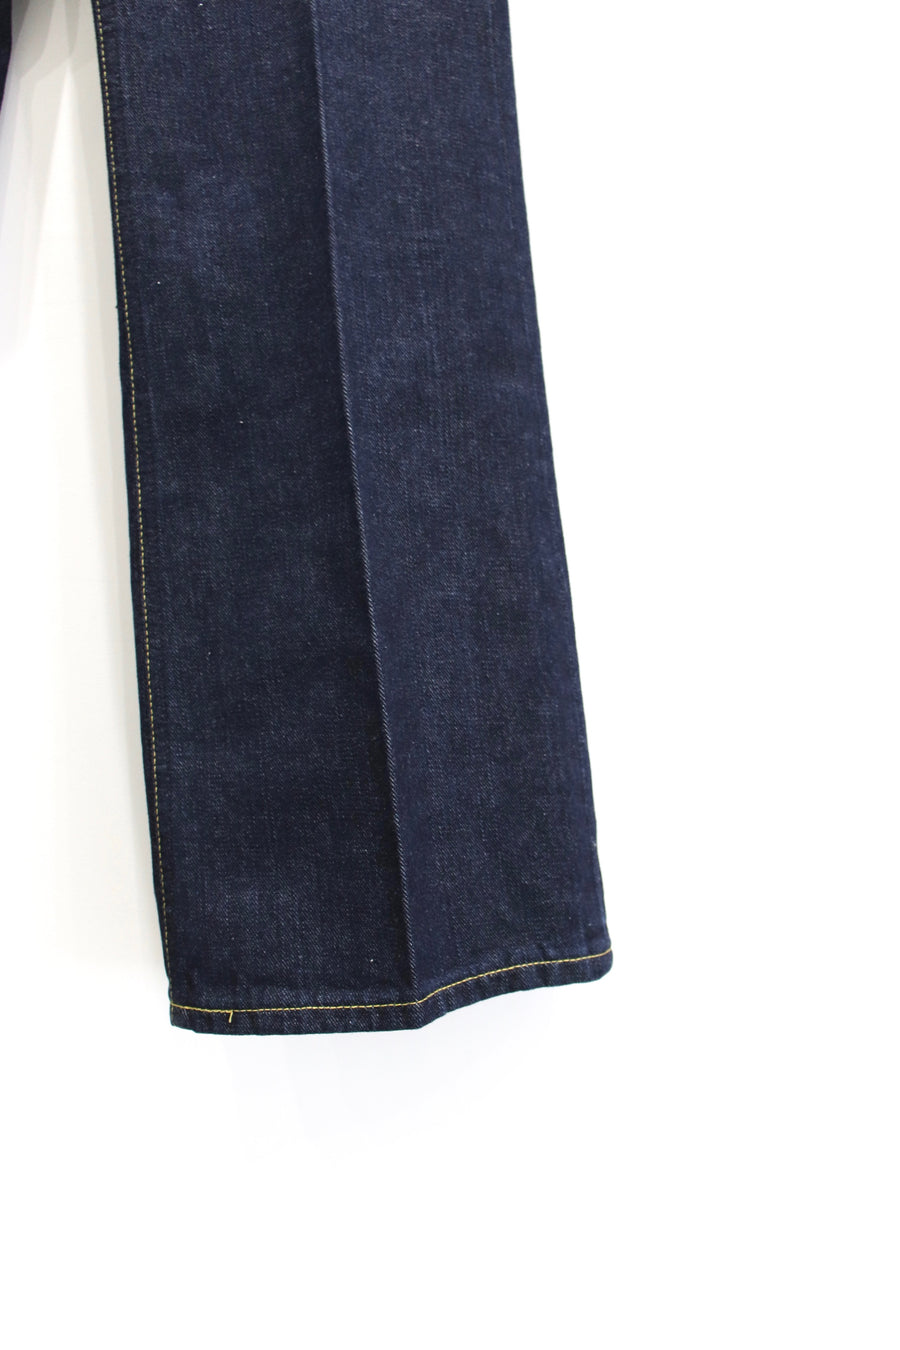 Bed J.W. FORD (Bedford) Mail Order of 22AW FLARE DENIM PANTS 